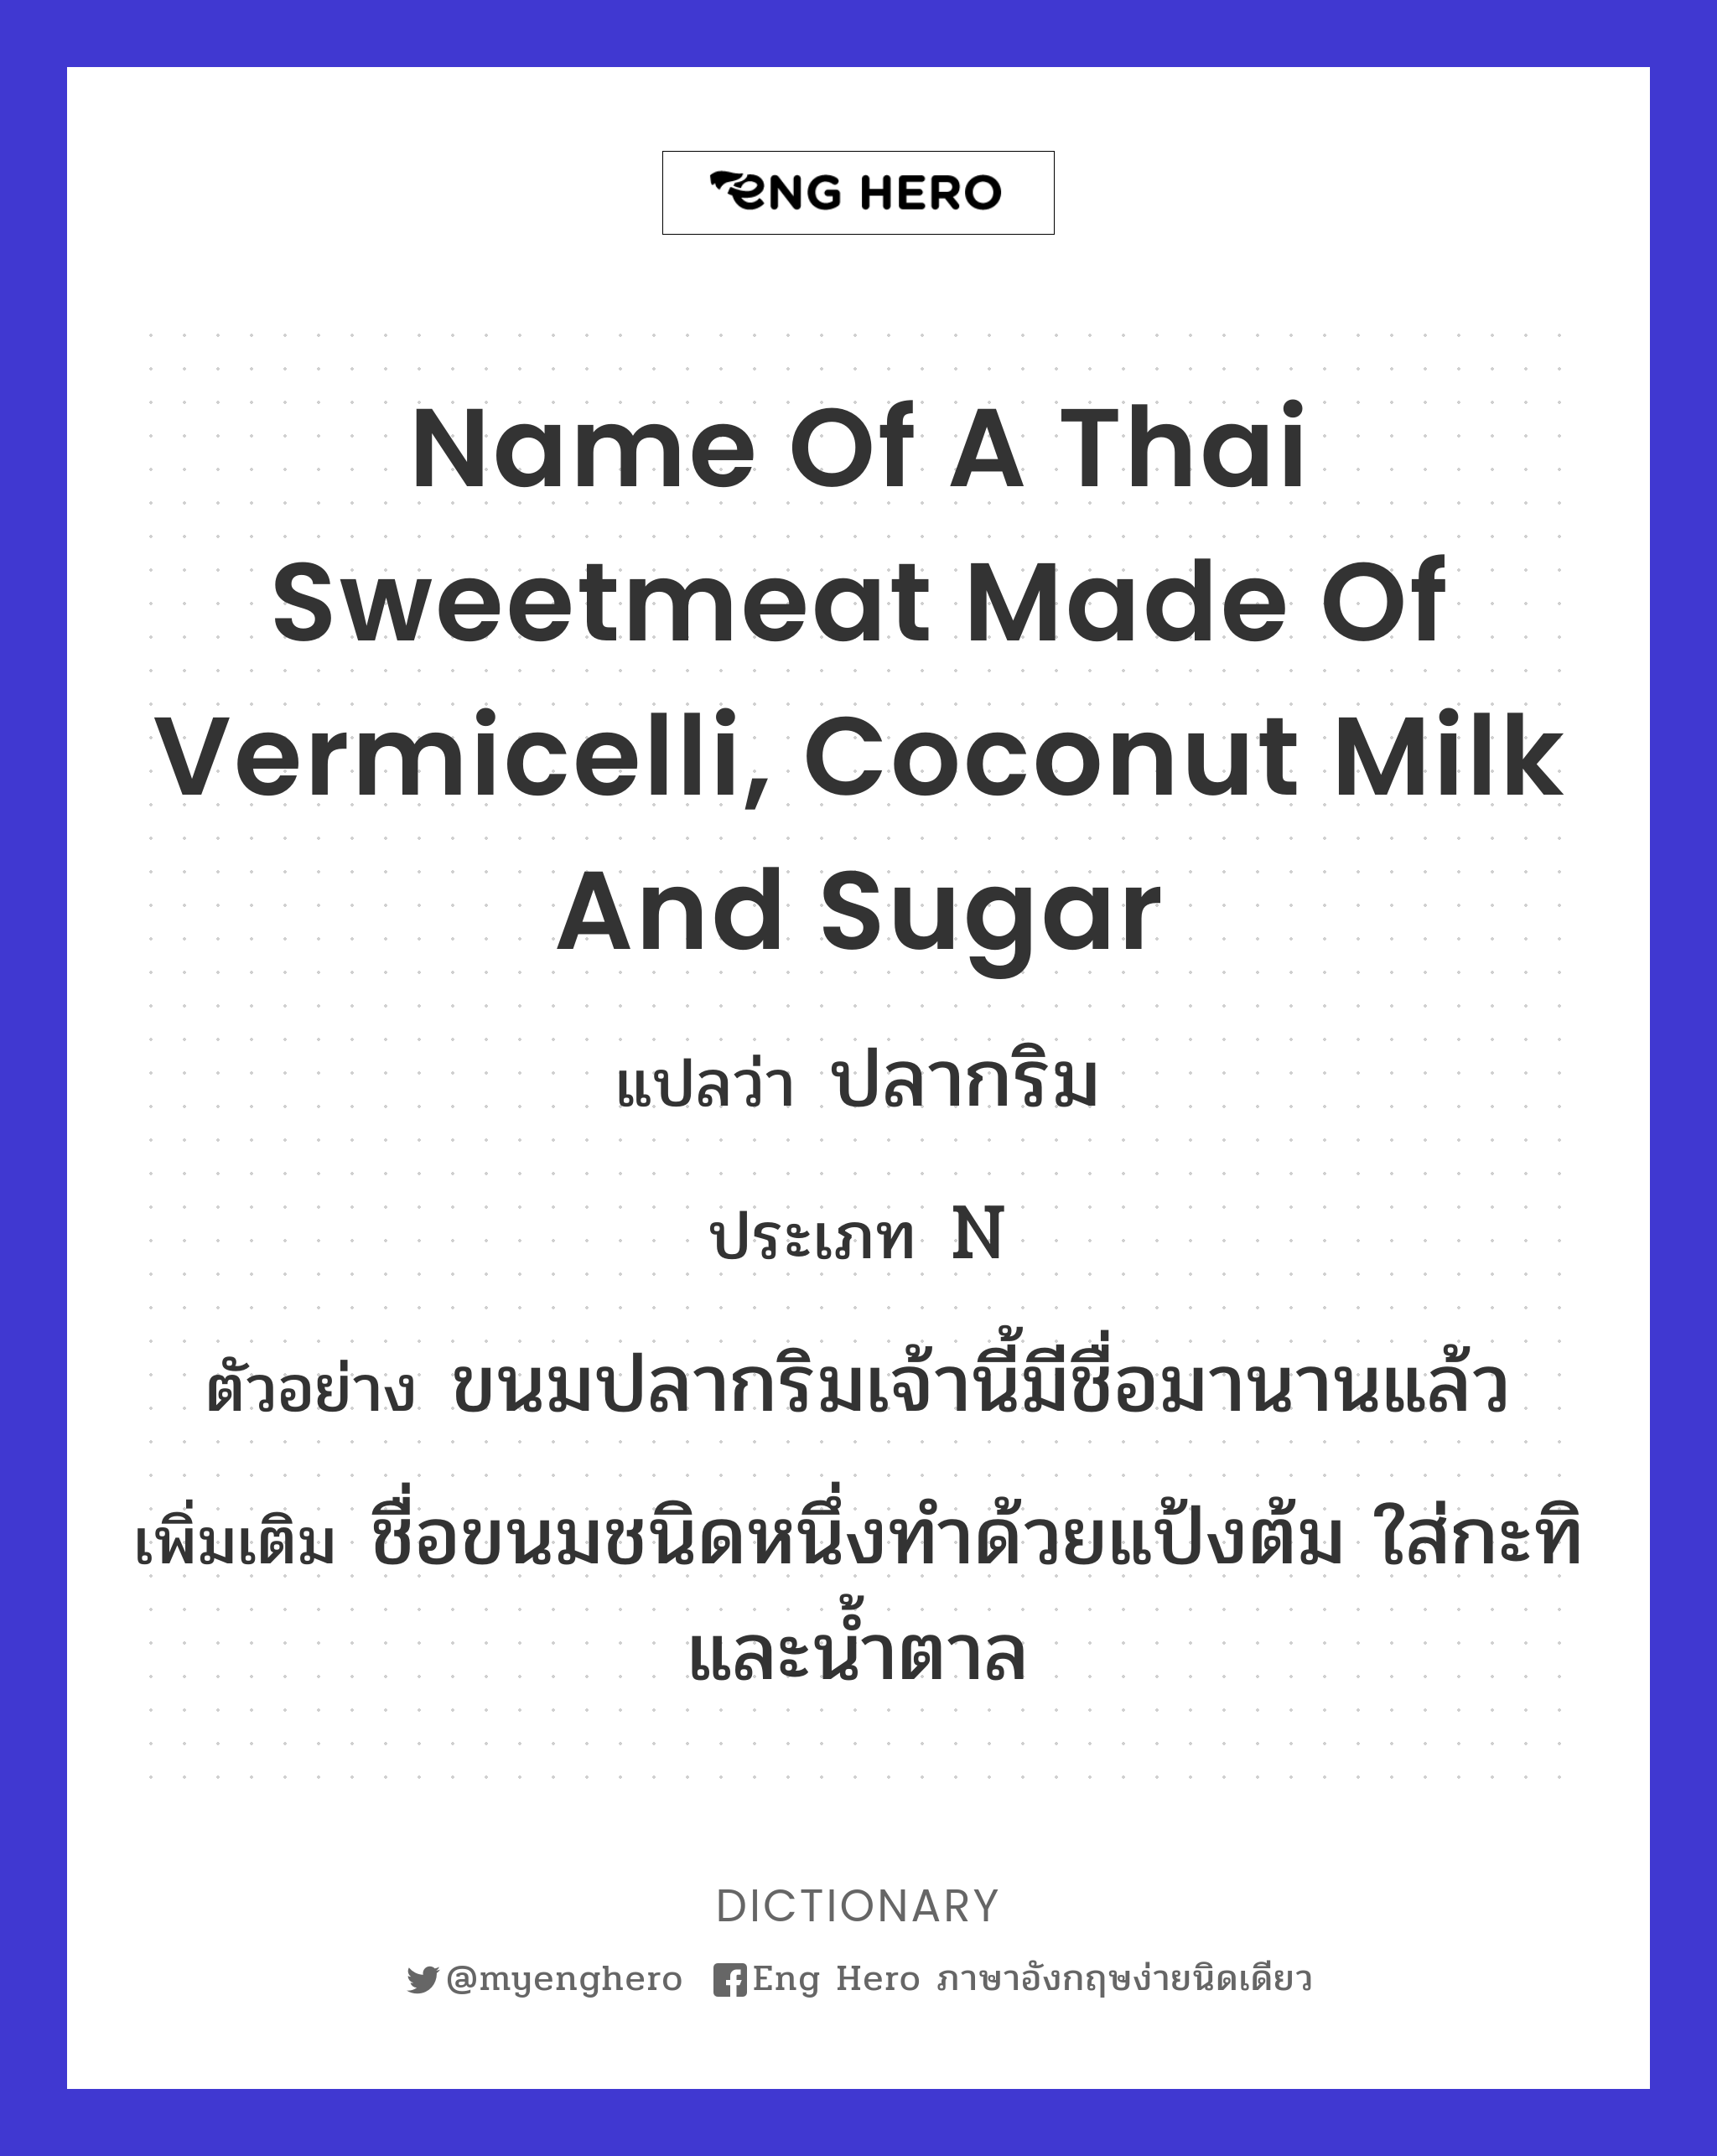 name of a Thai sweetmeat made of vermicelli, coconut milk and sugar